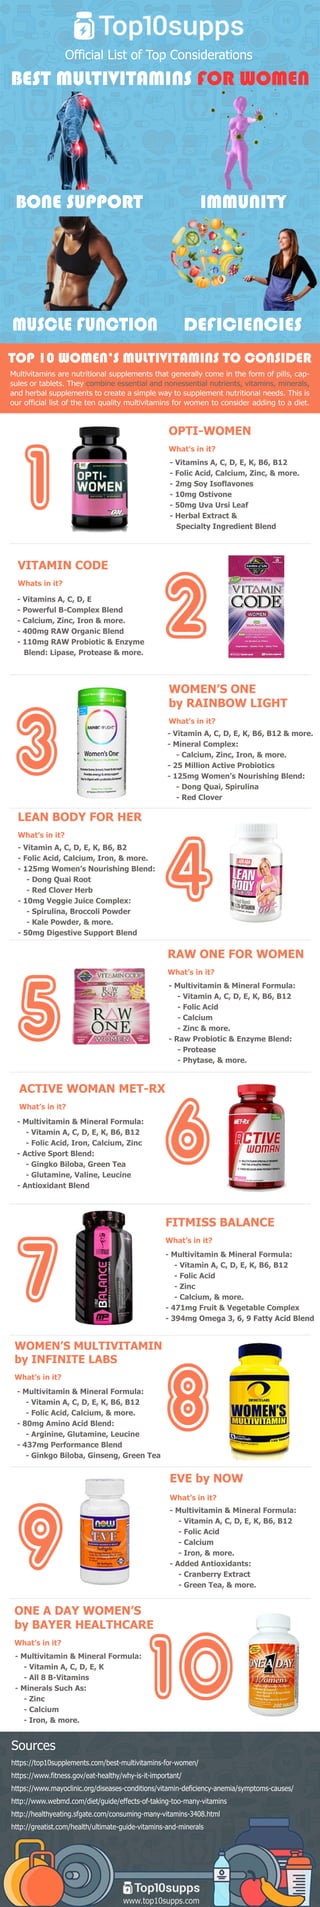 www.top10supps.com
https://top10supplements.com/best-multivitamins-for-women/
https://www.fitness.gov/eat-healthy/why-is-it-important/
https://www.mayoclinic.org/diseases-conditions/vitamin-deficiency-anemia/symptoms-causes/
http://www.webmd.com/diet/guide/effects-of-taking-too-many-vitamins
http://healthyeating.sfgate.com/consuming-many-vitamins-3408.html
http://greatist.com/health/ultimate-guide-vitamins-and-minerals
Sources
Multivitaminsarenutritionalsupplementsthatgenerallycomeintheform ofpills,cap-
sulesortablets.Theycombineessentialandnonessentialnutrients,vitamins,minerals,
andherbalsupplementstocreateasimplewaytosupplementnutritionalneeds.Thisis
ourofficiallistofthetenqualitymultivitaminsforwomentoconsideraddingtoadiet.
TOP10WOMEN’SMULTIVITAMINSTOCONSIDER
-Multivitamin&MineralFormula:
-VitaminA,C,D,E,K
-All8B-Vitamins
-MineralsSuchAs:
-Zinc
-Calcium
-Iron,&more.-Iron,&more.
ONEADAYWOMEN’S
byBAYERHEALTHCARE
What’sinit?
-Multivitamin&MineralFormula:
-VitaminA,C,D,E,K,B6,B12
-FolicAcid
-Calcium
-Iron,&more.
-AddedAntioxidants:
-CranberryExtract-CranberryExtract
-GreenTea,&more.
EVEbyNOW
What’sinit?
-Multivitamin&MineralFormula:
-VitaminA,C,D,E,K,B6,B12
-FolicAcid,Calcium,&more.
-80mgAminoAcidBlend:
-Arginine,Glutamine,Leucine
-437mgPerformanceBlend
-GinkgoBiloba,Ginseng,GreenTea-GinkgoBiloba,Ginseng,GreenTea
WOMEN’SMULTIVITAMIN
byINFINITELABS
What’sinit?
-Multivitamin&MineralFormula:
-VitaminA,C,D,E,K,B6,B12
-FolicAcid
-Zinc
-Calcium,&more.
-471mgFruit&VegetableComplex
-394mgOmega3,6,9FattyAcidBlend-394mgOmega3,6,9FattyAcidBlend
FITMISSBALANCE
What’sinit?
-Multivitamin&MineralFormula:
-VitaminA,C,D,E,K,B6,B12
-FolicAcid,Iron,Calcium,Zinc
-ActiveSportBlend:
-GingkoBiloba,GreenTea
-Glutamine,Valine,Leucine
-AntioxidantBlend-AntioxidantBlend
ACTIVEWOMANMET-RX
What’sinit?
-Multivitamin&MineralFormula:
-VitaminA,C,D,E,K,B6,B12
-FolicAcid
-Calcium
-Zinc&more.
-Raw Probiotic&EnzymeBlend:
-Protease-Protease
-Phytase,&more.
RAW ONEFORWOMEN
What’sinit?
-VitaminA,C,D,E,K,B6,B2
-FolicAcid,Calcium,Iron,&more.
-125mgWomen’sNourishingBlend:
-DongQuaiRoot
-RedCloverHerb
-10mgVeggieJuiceComplex:
-Spirulina,BroccoliPowder-Spirulina,BroccoliPowder
-KalePowder,&more.
-50mgDigestiveSupportBlend
LEANBODYFORHER
What’sinit?
-VitaminA,C,D,E,K,B6,B12&more.
-MineralComplex:
-Calcium,Zinc,Iron,&more.
-25MillionActiveProbiotics
-125mgWomen’sNourishingBlend:
-DongQuai,Spirulina
-RedClover-RedClover
WOMEN’SONE
byRAINBOW LIGHT
What’sinit?
-VitaminsA,C,D,E
-PowerfulB-ComplexBlend
-Calcium,Zinc,Iron&more.
-400mgRAW OrganicBlend
-110mgRAW Probiotic&Enzyme
Blend:Lipase,Protease&more.
VITAMINCODE
Whatsinit?
-VitaminsA,C,D,E,K,B6,B12
-FolicAcid,Calcium,Zinc,&more.
-2mgSoyIsoflavones
-10mgOstivone
-50mgUvaUrsiLeaf
-HerbalExtract&
SpecialtyIngredientBlendSpecialtyIngredientBlend
OPTI-WOMEN
What’sinit?
BONESUPPORT IMMUNITY
DEFICIENCIESMUSCLEFUNCTION
BESTMULTIVITAMINSFORWOMEN
OfficialListofTopConsiderations
 